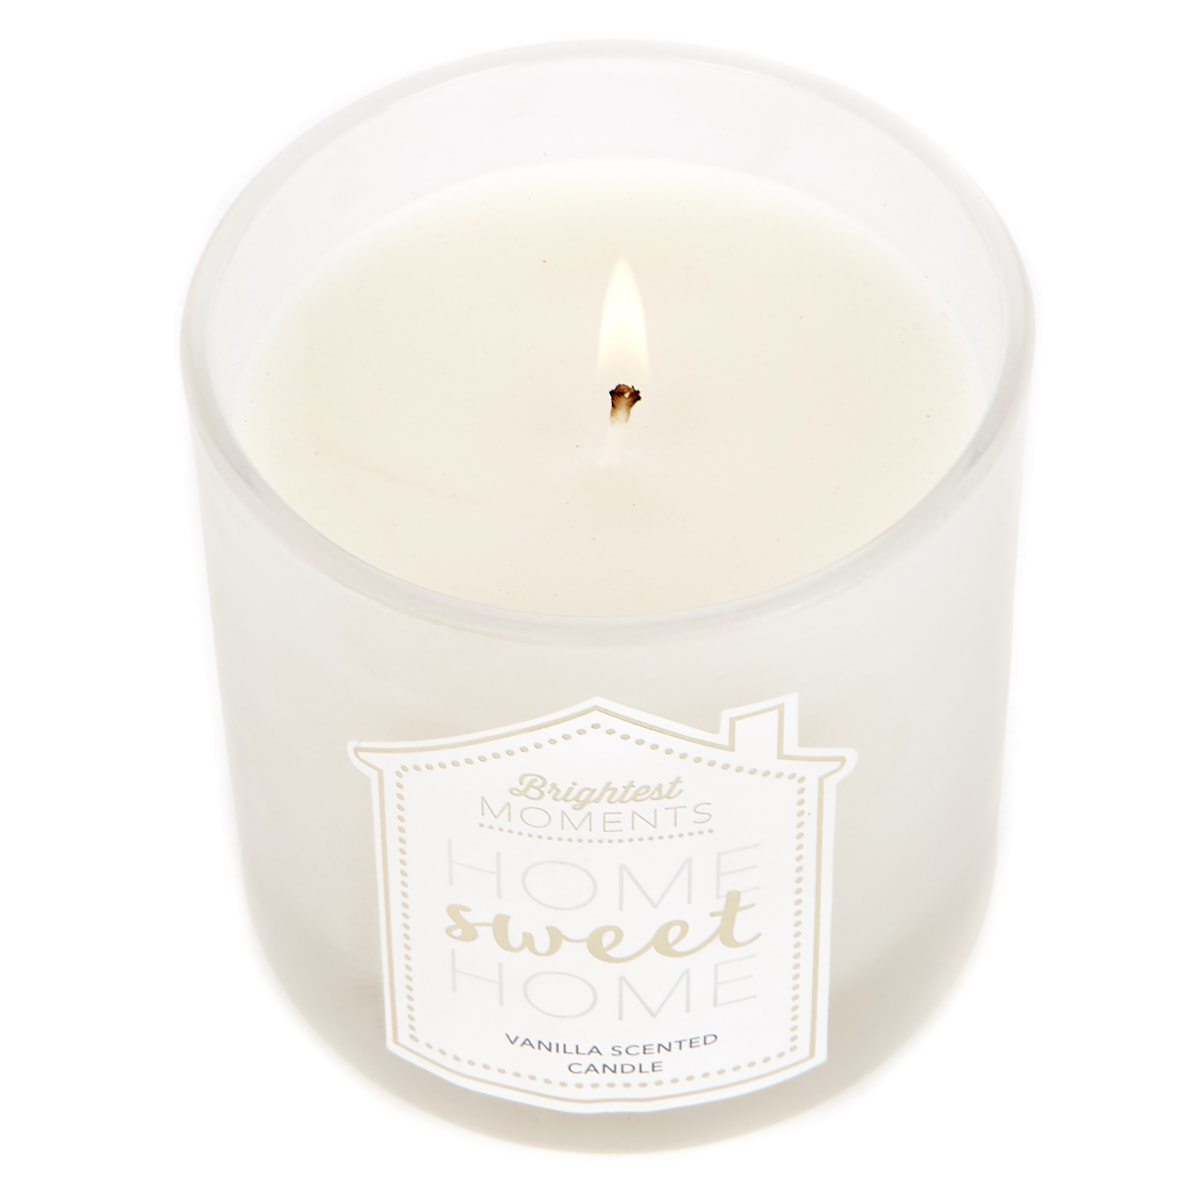 Brightest Moments Vanilla Scented Celebration Candle - Home Sweet Home